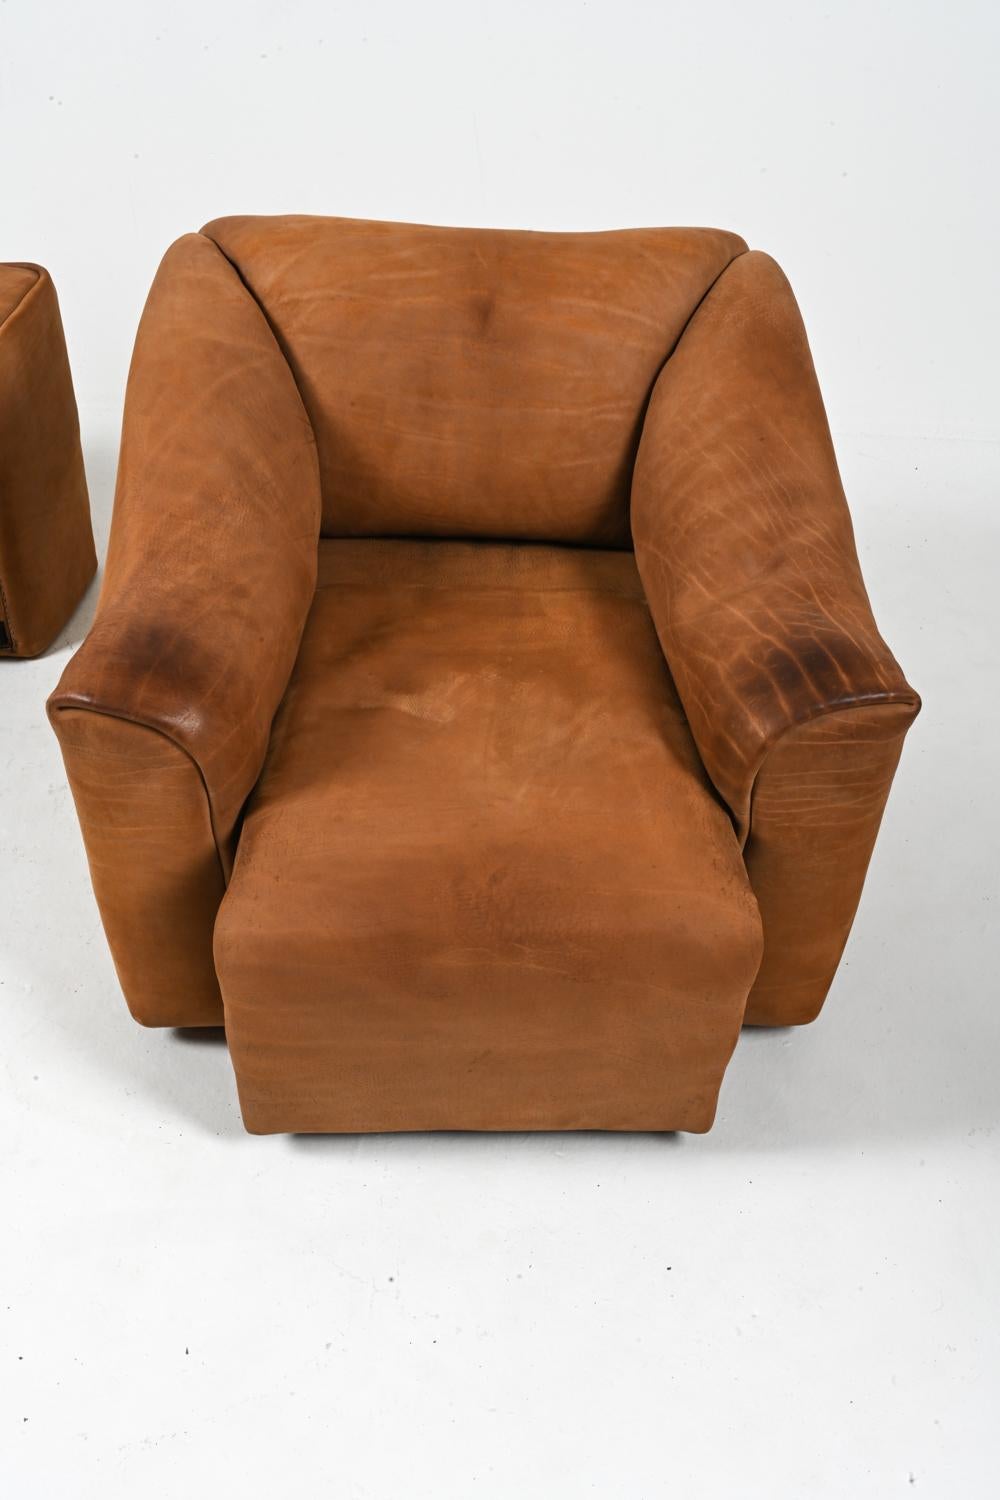 De Sede DS-47 Lounge Chair & Ottoman in Nubuck Leather, c. 1970's For Sale 10